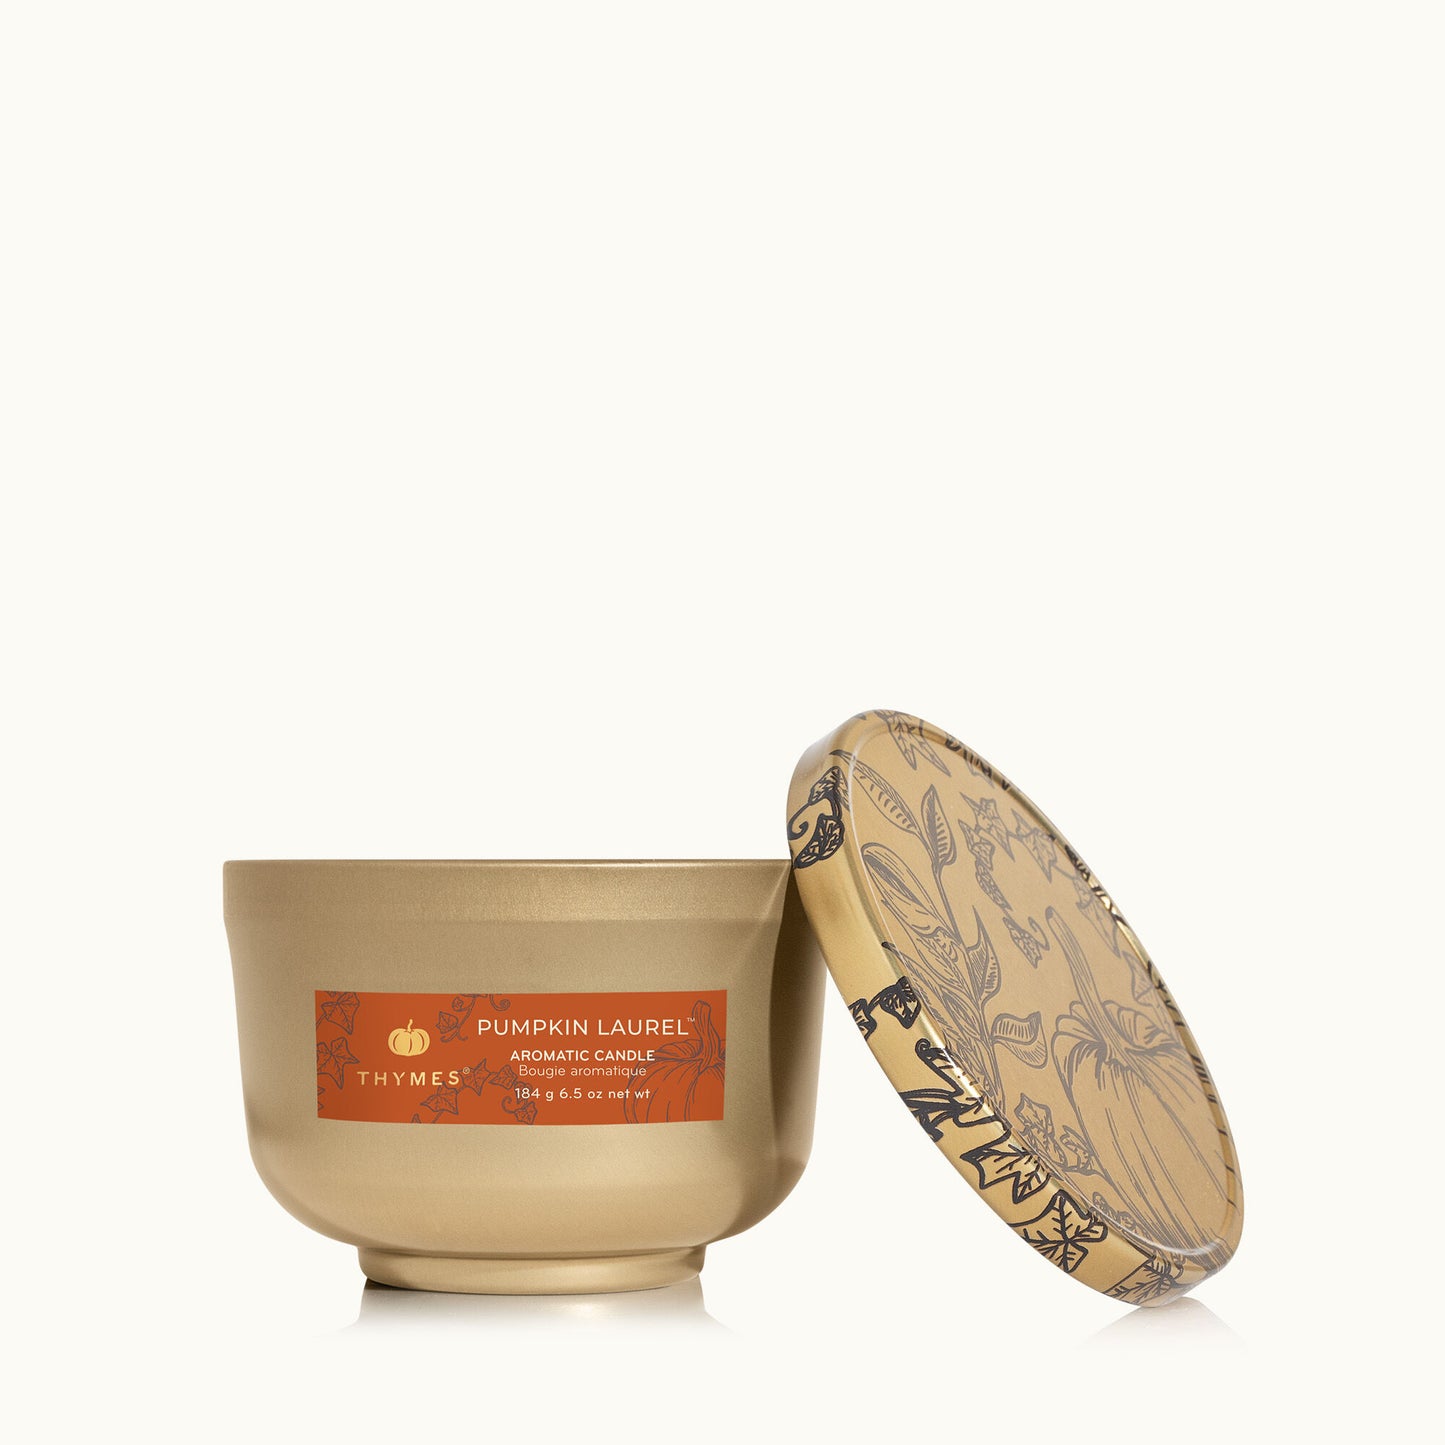 Thymes Pumpkin Laurel Candle Tin with Gold Lid-Candles-Thymes-The Village Shoppe, Women’s Fashion Boutique, Shop Online and In Store - Located in Muscle Shoals, AL.